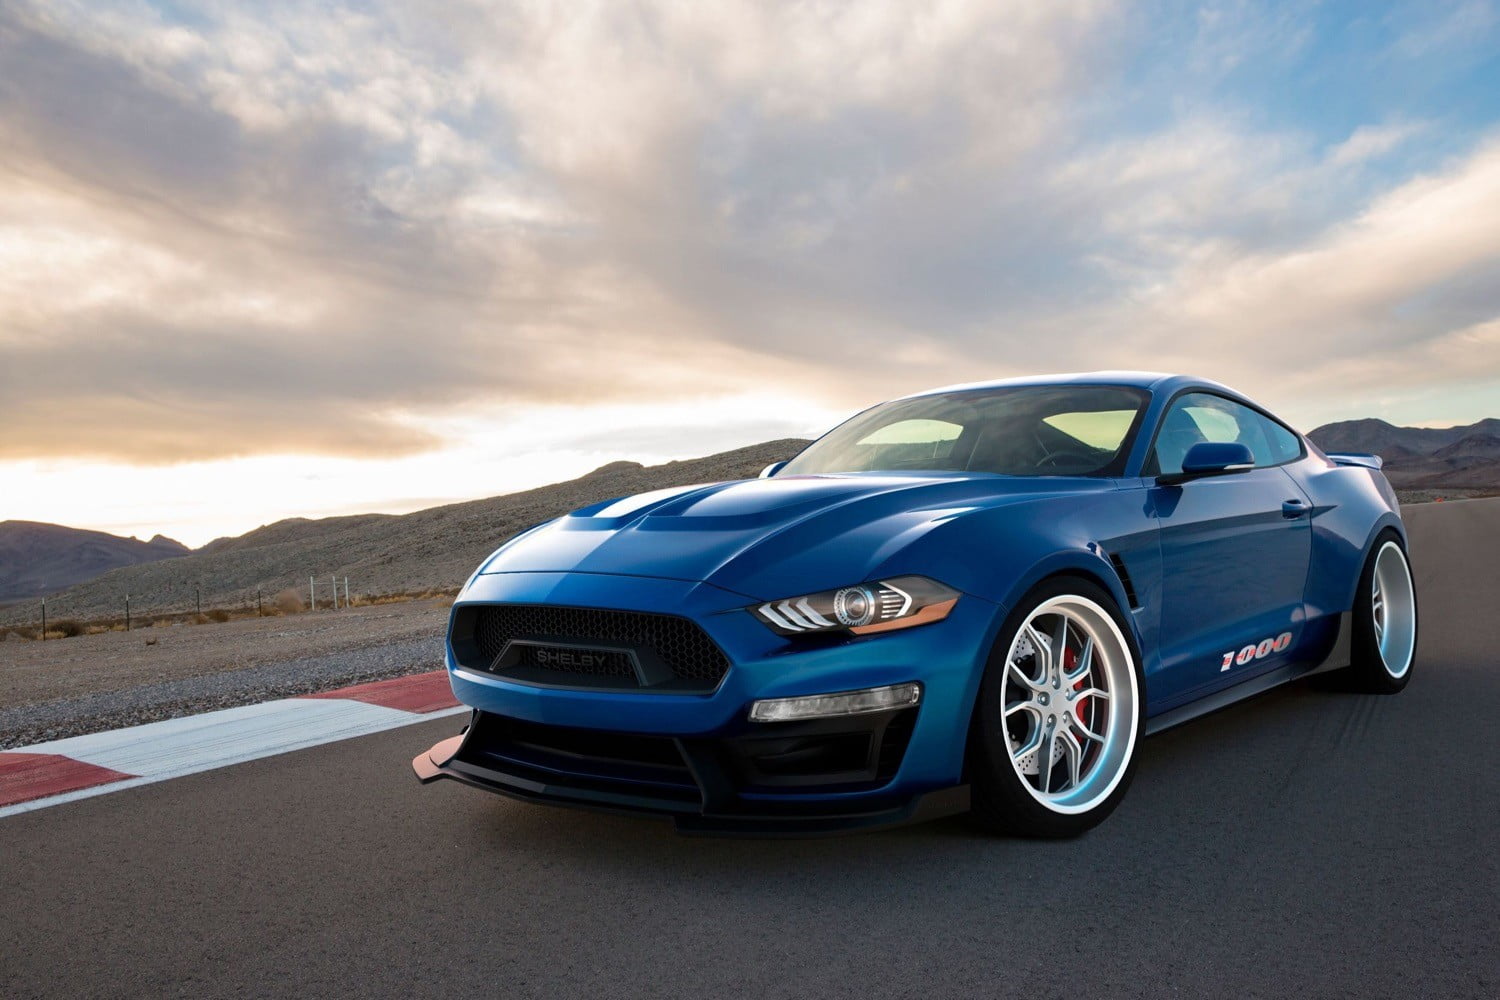 The 2018 Shelby 1000 Mustang